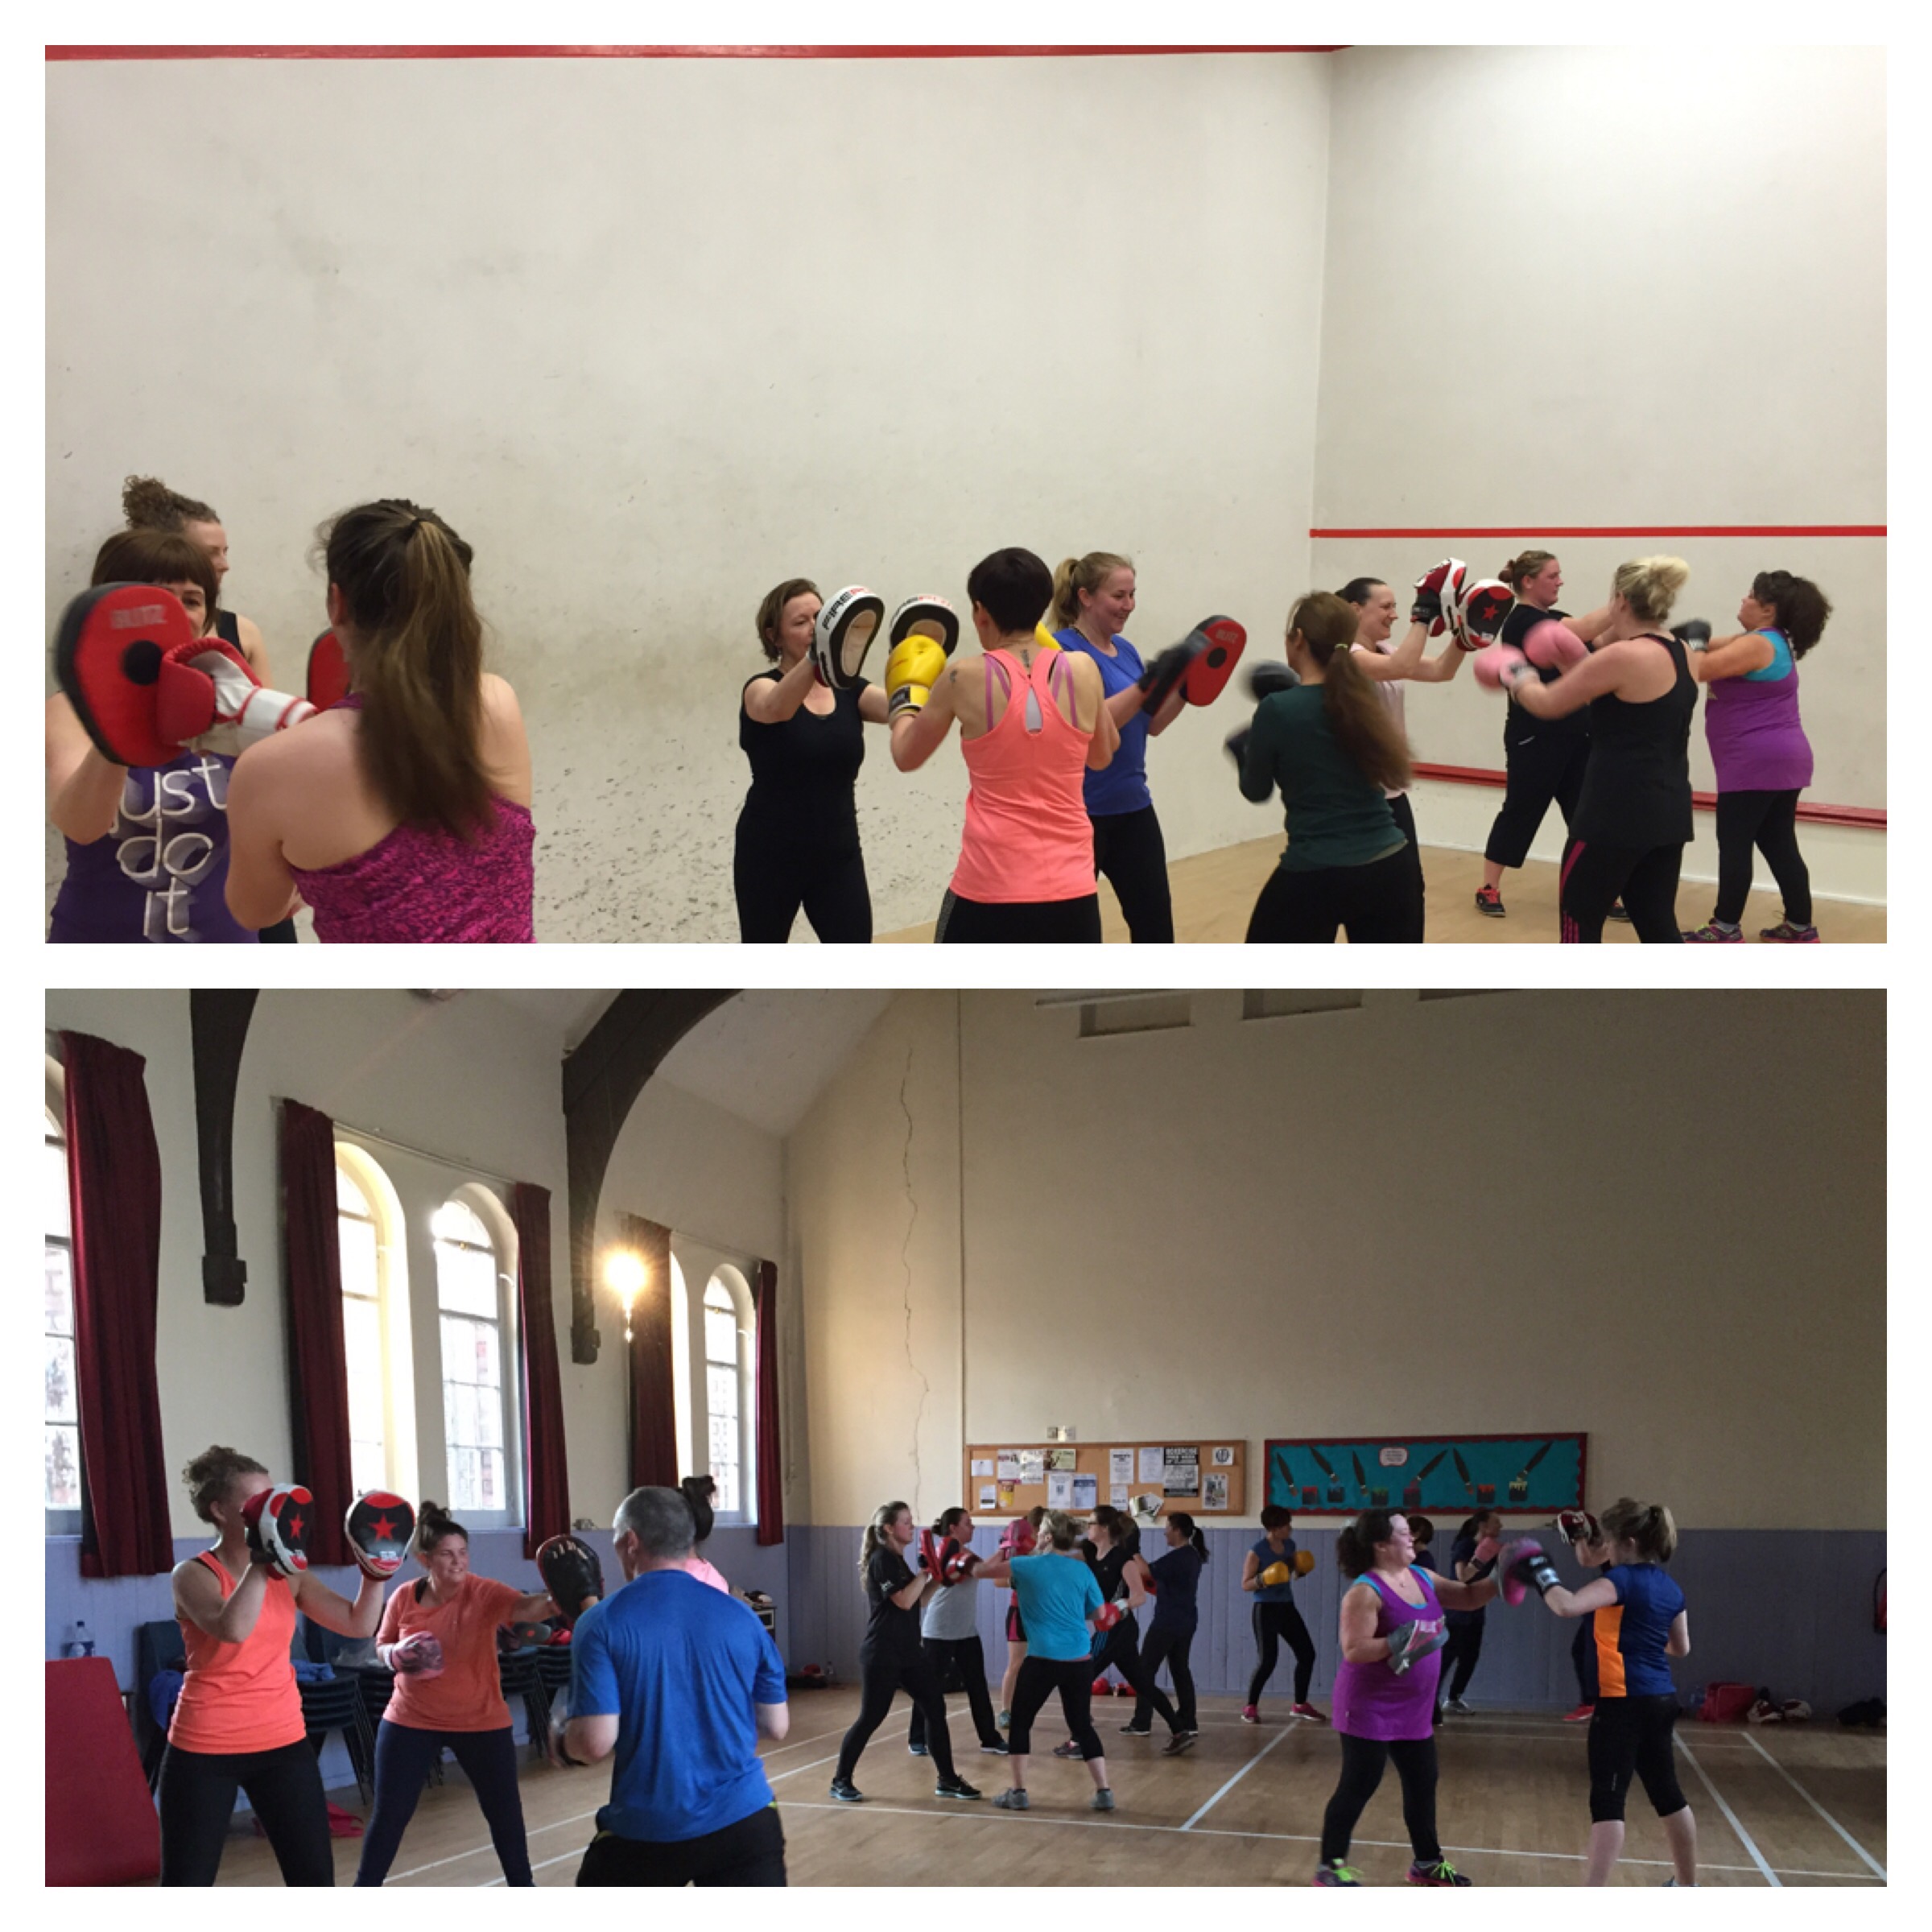 Saturday and last nights Boxercise sessions 